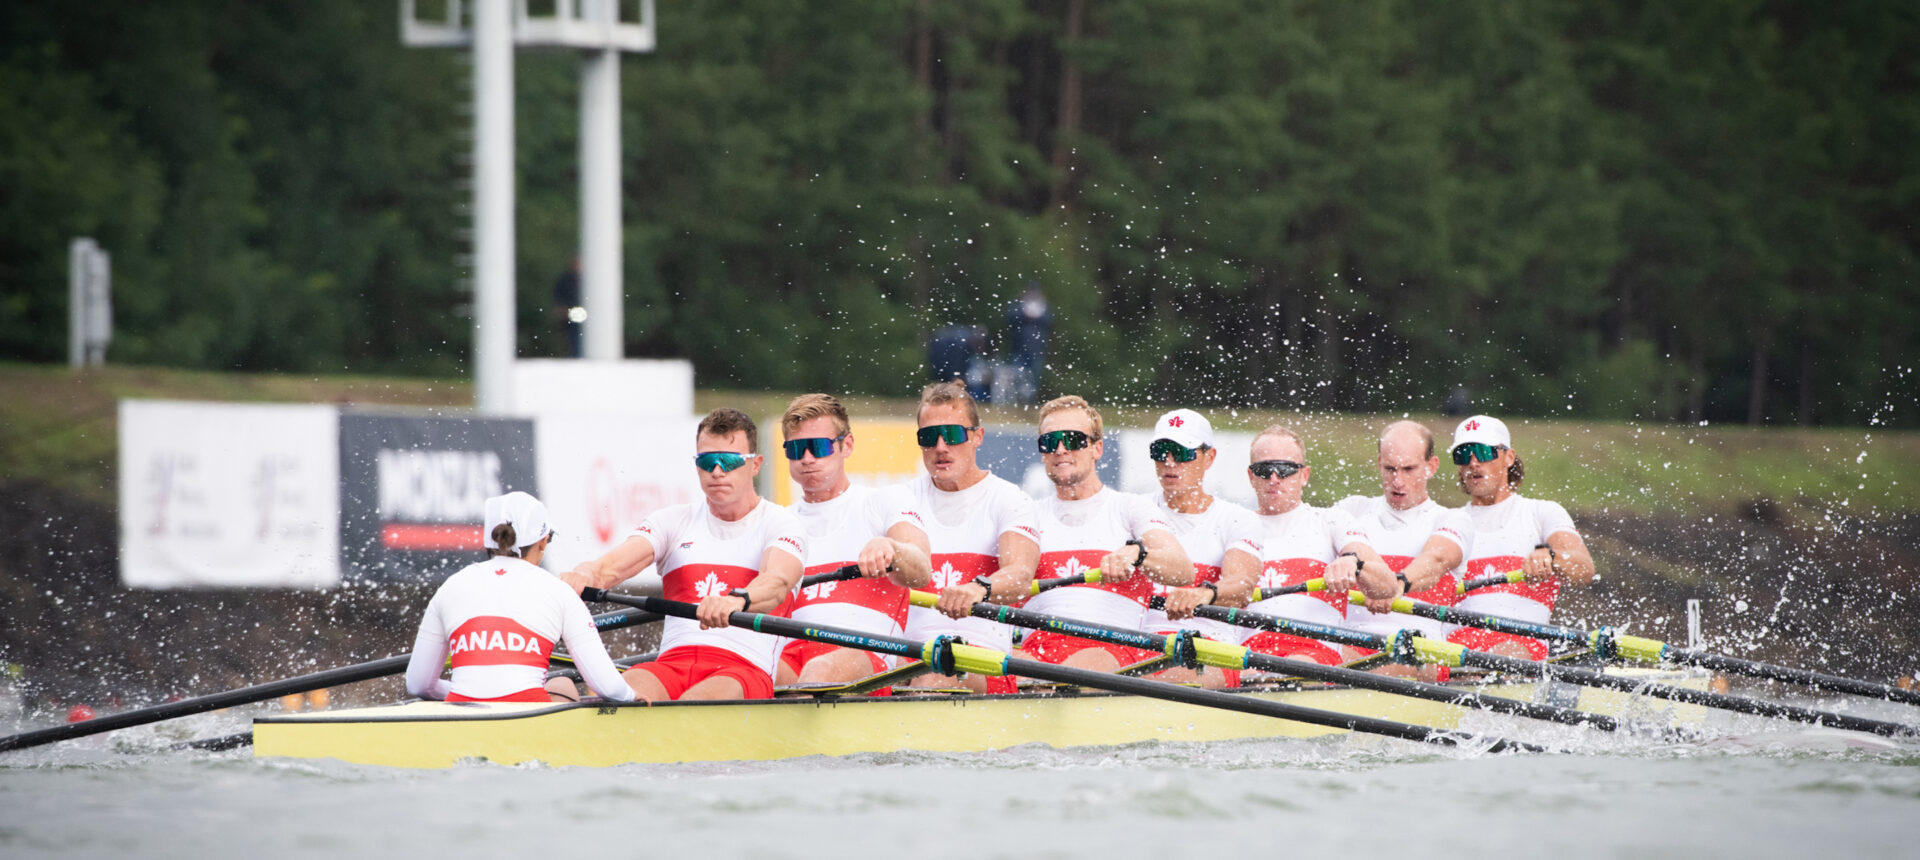 Canadian eights in the A finals